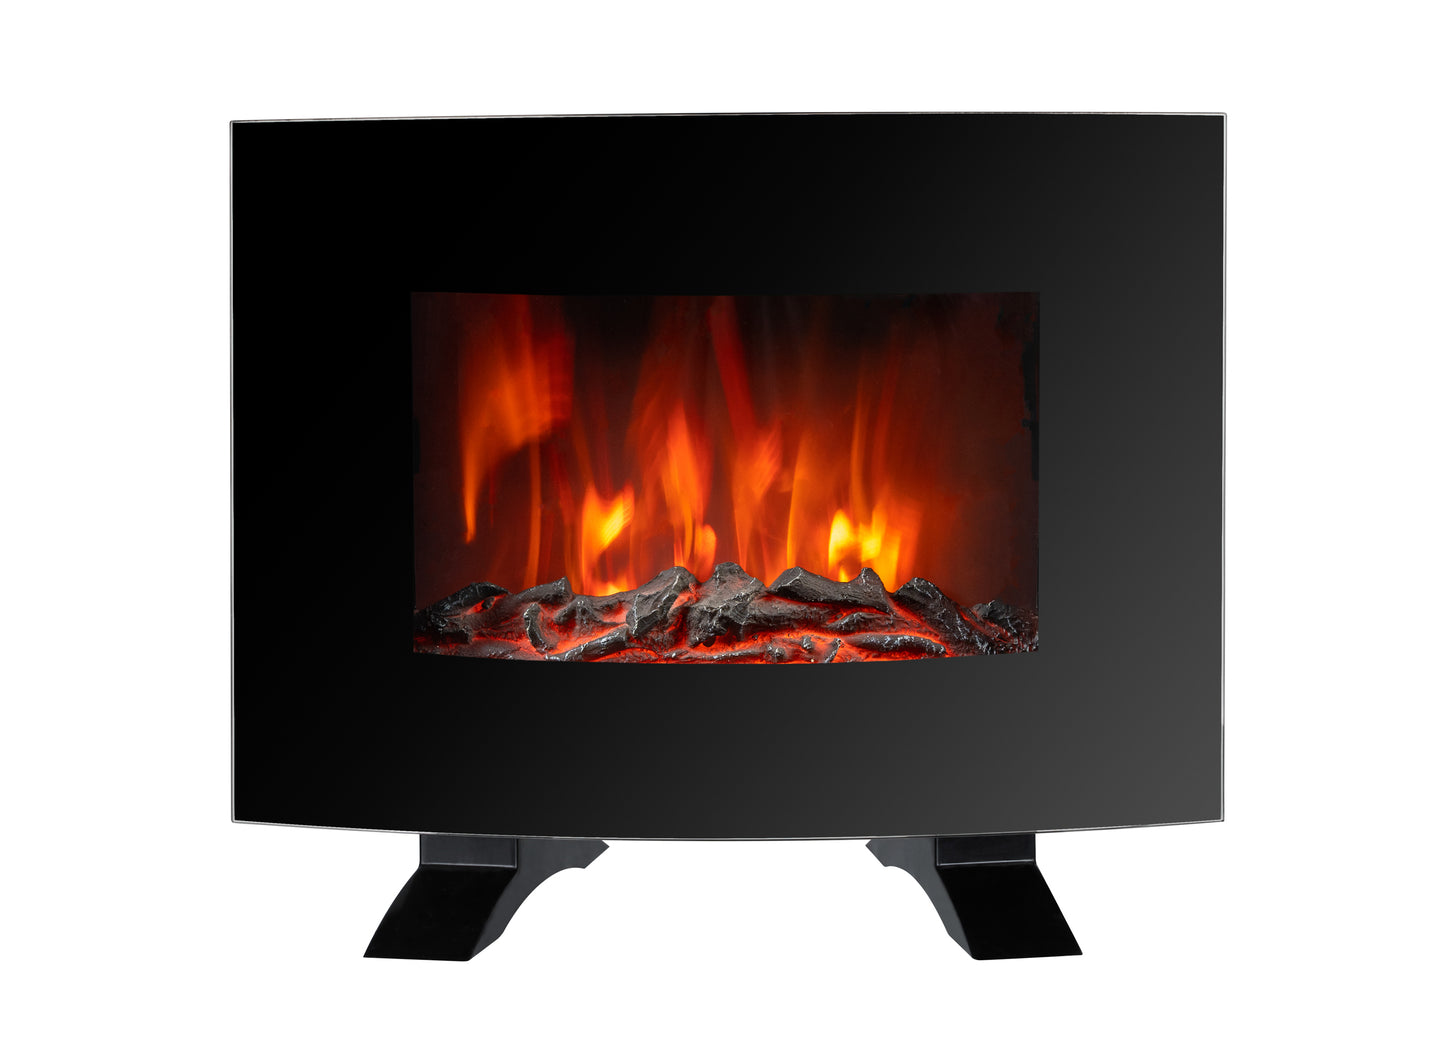 Danby 22" Wall Mount Electric Fireplace in Black